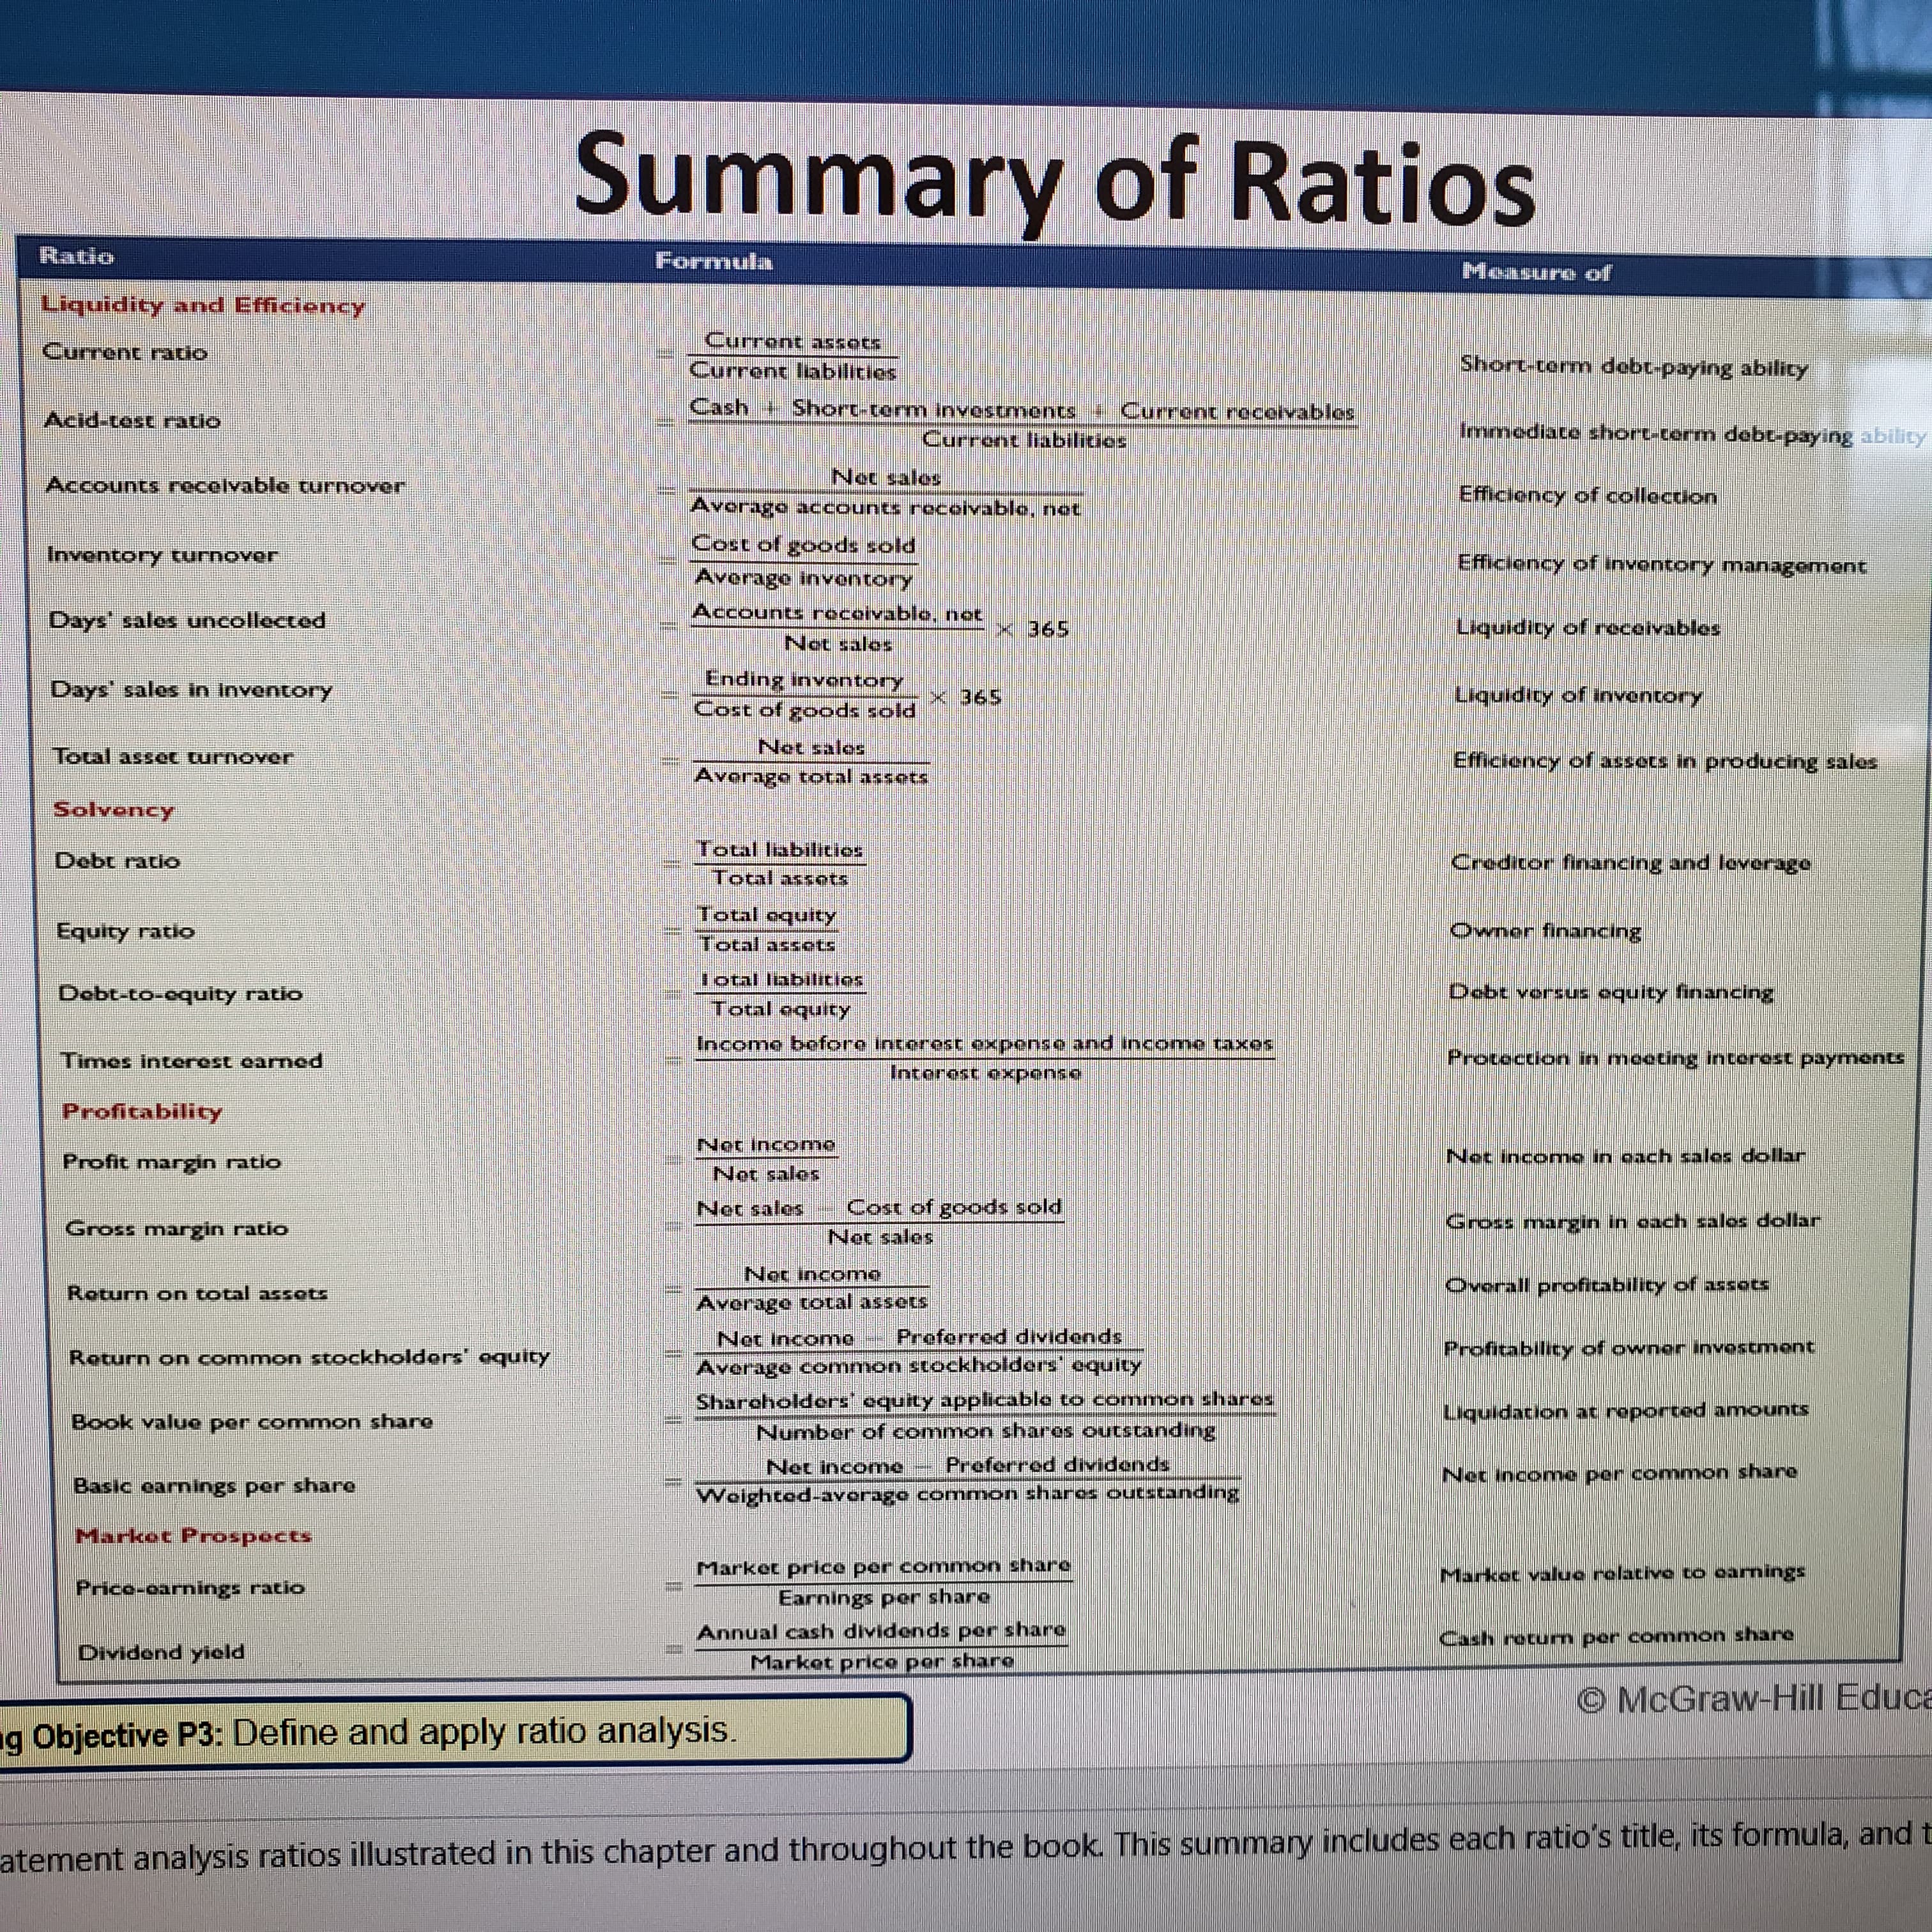 Summary of Ratios
Ratio
Formula
Measure of
Liquidity and Efficiency
Current assets
Current ratio
Short-term debt-paying abilicy
Current labilities
Cash + Short-torm investments Current recerables
Acid-test ratio
Immediate short-cerm debt-paying ability
Curront liabilitics
Net sales
Accounts recelvable turnover
Efficiency of collection
Avorage accounts rocolvable,
net
Cost of goods sold
Inventory turnover
Efficiency of invontory management
Average inventory
Accounts rocolvable, not
Days' salos uncollected
Liquidicy of receivables
x 365
Net sales
Ending invontory
Cost of goods sold
Days' sales In inventory
Liquidity of inventory
x 365
Net sales
Total asset turnover
Efficiency of assets in producing sales
Avorago total assets
Solvency
Total liabilitios
Total assots
Croditor financing and leverage
Debt ratio
Total oquity
Owner financing
Equity ratio
Total assots
lotal labilitios
Dobt vorsus oquity financing
Debt-to-oquity ratio
Total oquity
Income before Interest oxpense and Income taxes
Interest expense
Procoction in moetins interest paymonts
Times interost carned
Profitability
Net Income
Not inconmo in oach salos dollar
Profit margin ratio
Not sales
Cost of goods sold
Net sales
Net salos
Gross margin in cach salos dollar
Gross margin ratio
Noc income
Overall profitabilicy of assots
Roturn on total assots
Average total assets
Proforred dividends
Not Incomne
Average common stockholders equity
Profitabilicy of owner Invostmont
Roturn on common stockholders" equity
Sharoholders.oquity aPplicablo to common shares
Number of common shares outstanding
Preferred dividends
Book value per common share
Net income
Net income per common share
Basic earnings per share
Market Prospects
Market price per common share
Earnings per share
Markoc value rolative to oarnings
Price-oarnings ratio
Annual cash dividends per share
Cash retum per common share
Dividend yield
Market price por share
© McGraw-Hill Educa
ng Objective P3: Define and apply ratio analysis.
atement analysis ratios illustrated in this chapter and throughout the book. This summary includes each ratio's title, its formula, and t
